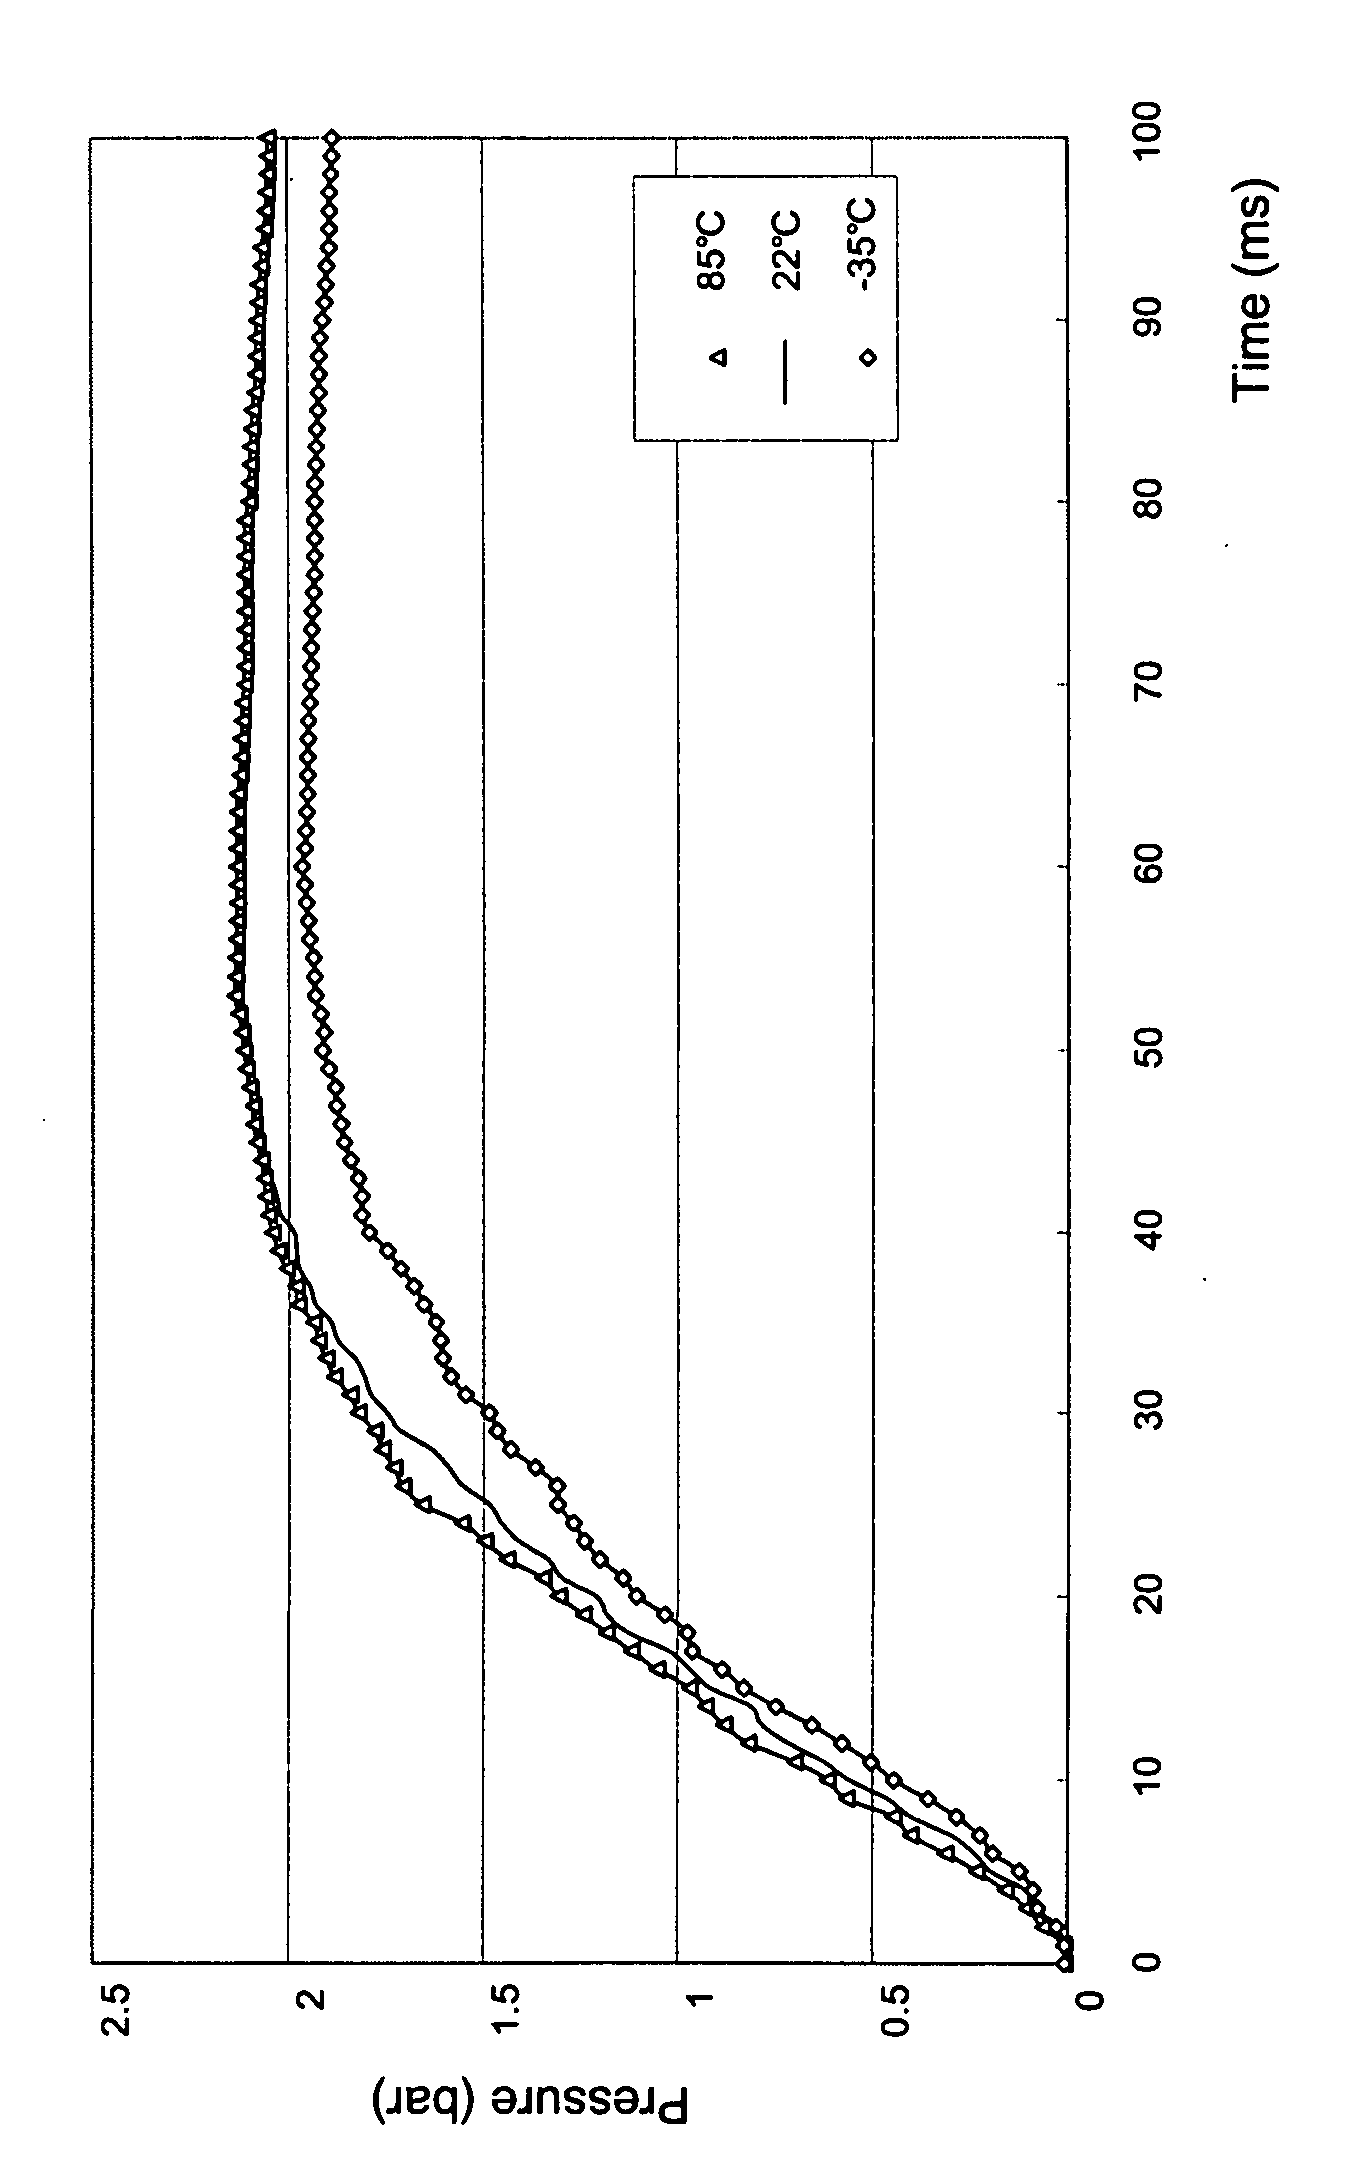 Compositions of gas generates with polymer adhesive